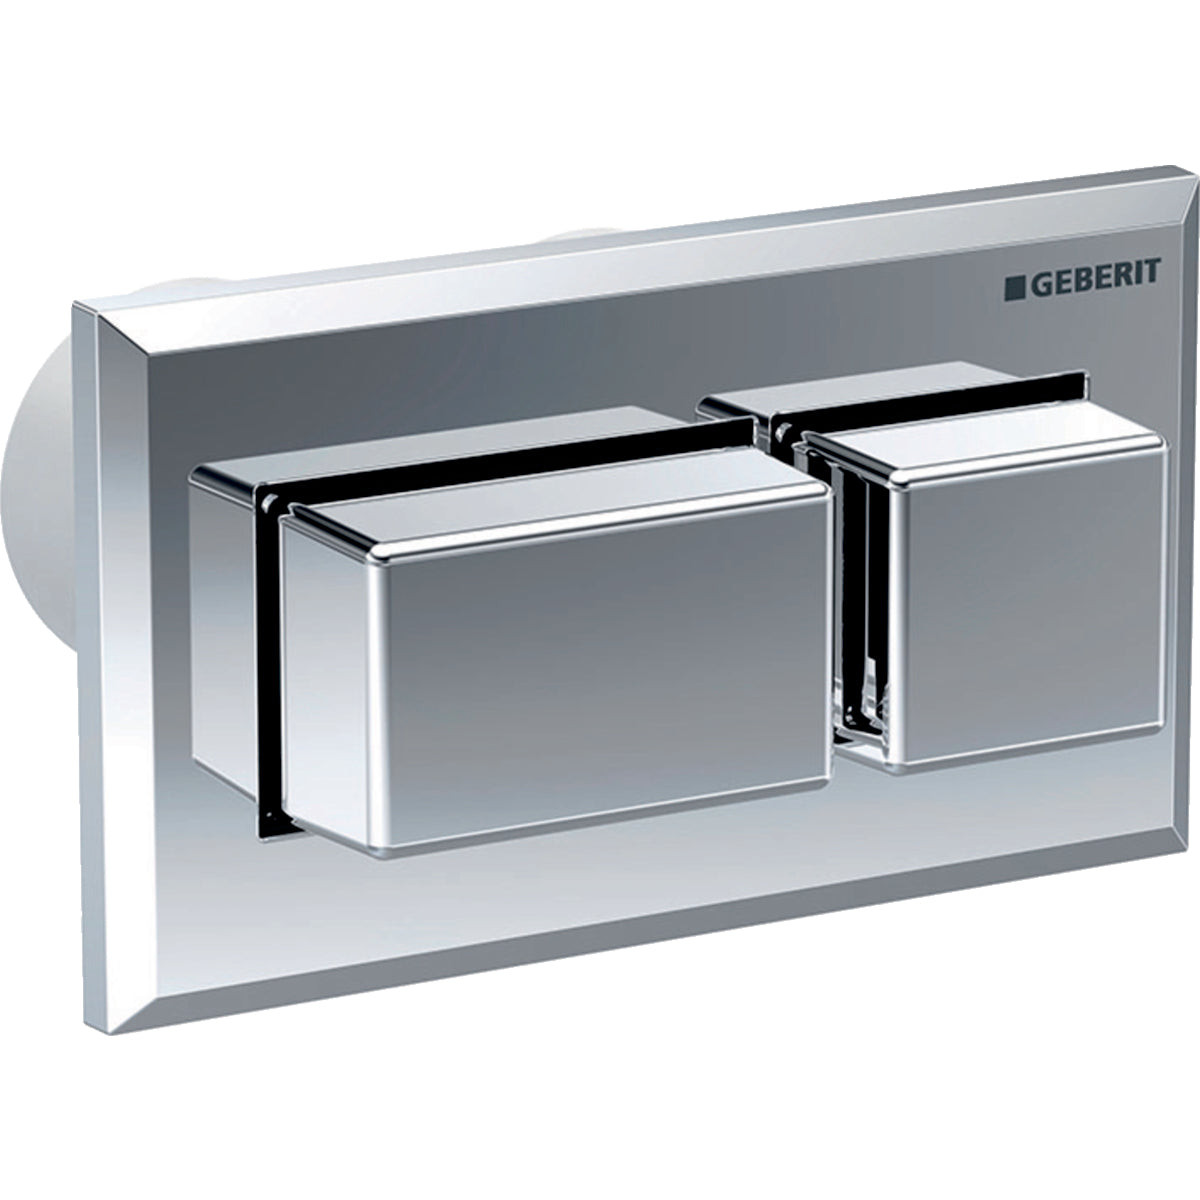 Geberit 116.054.21.1- Geberit remote flush actuation, square design, pneumatic, for dual flush, for Sigma concealed cistern 8 cm, concealed actuator, protruding: bright chrome-plated - FaucetExpress.ca